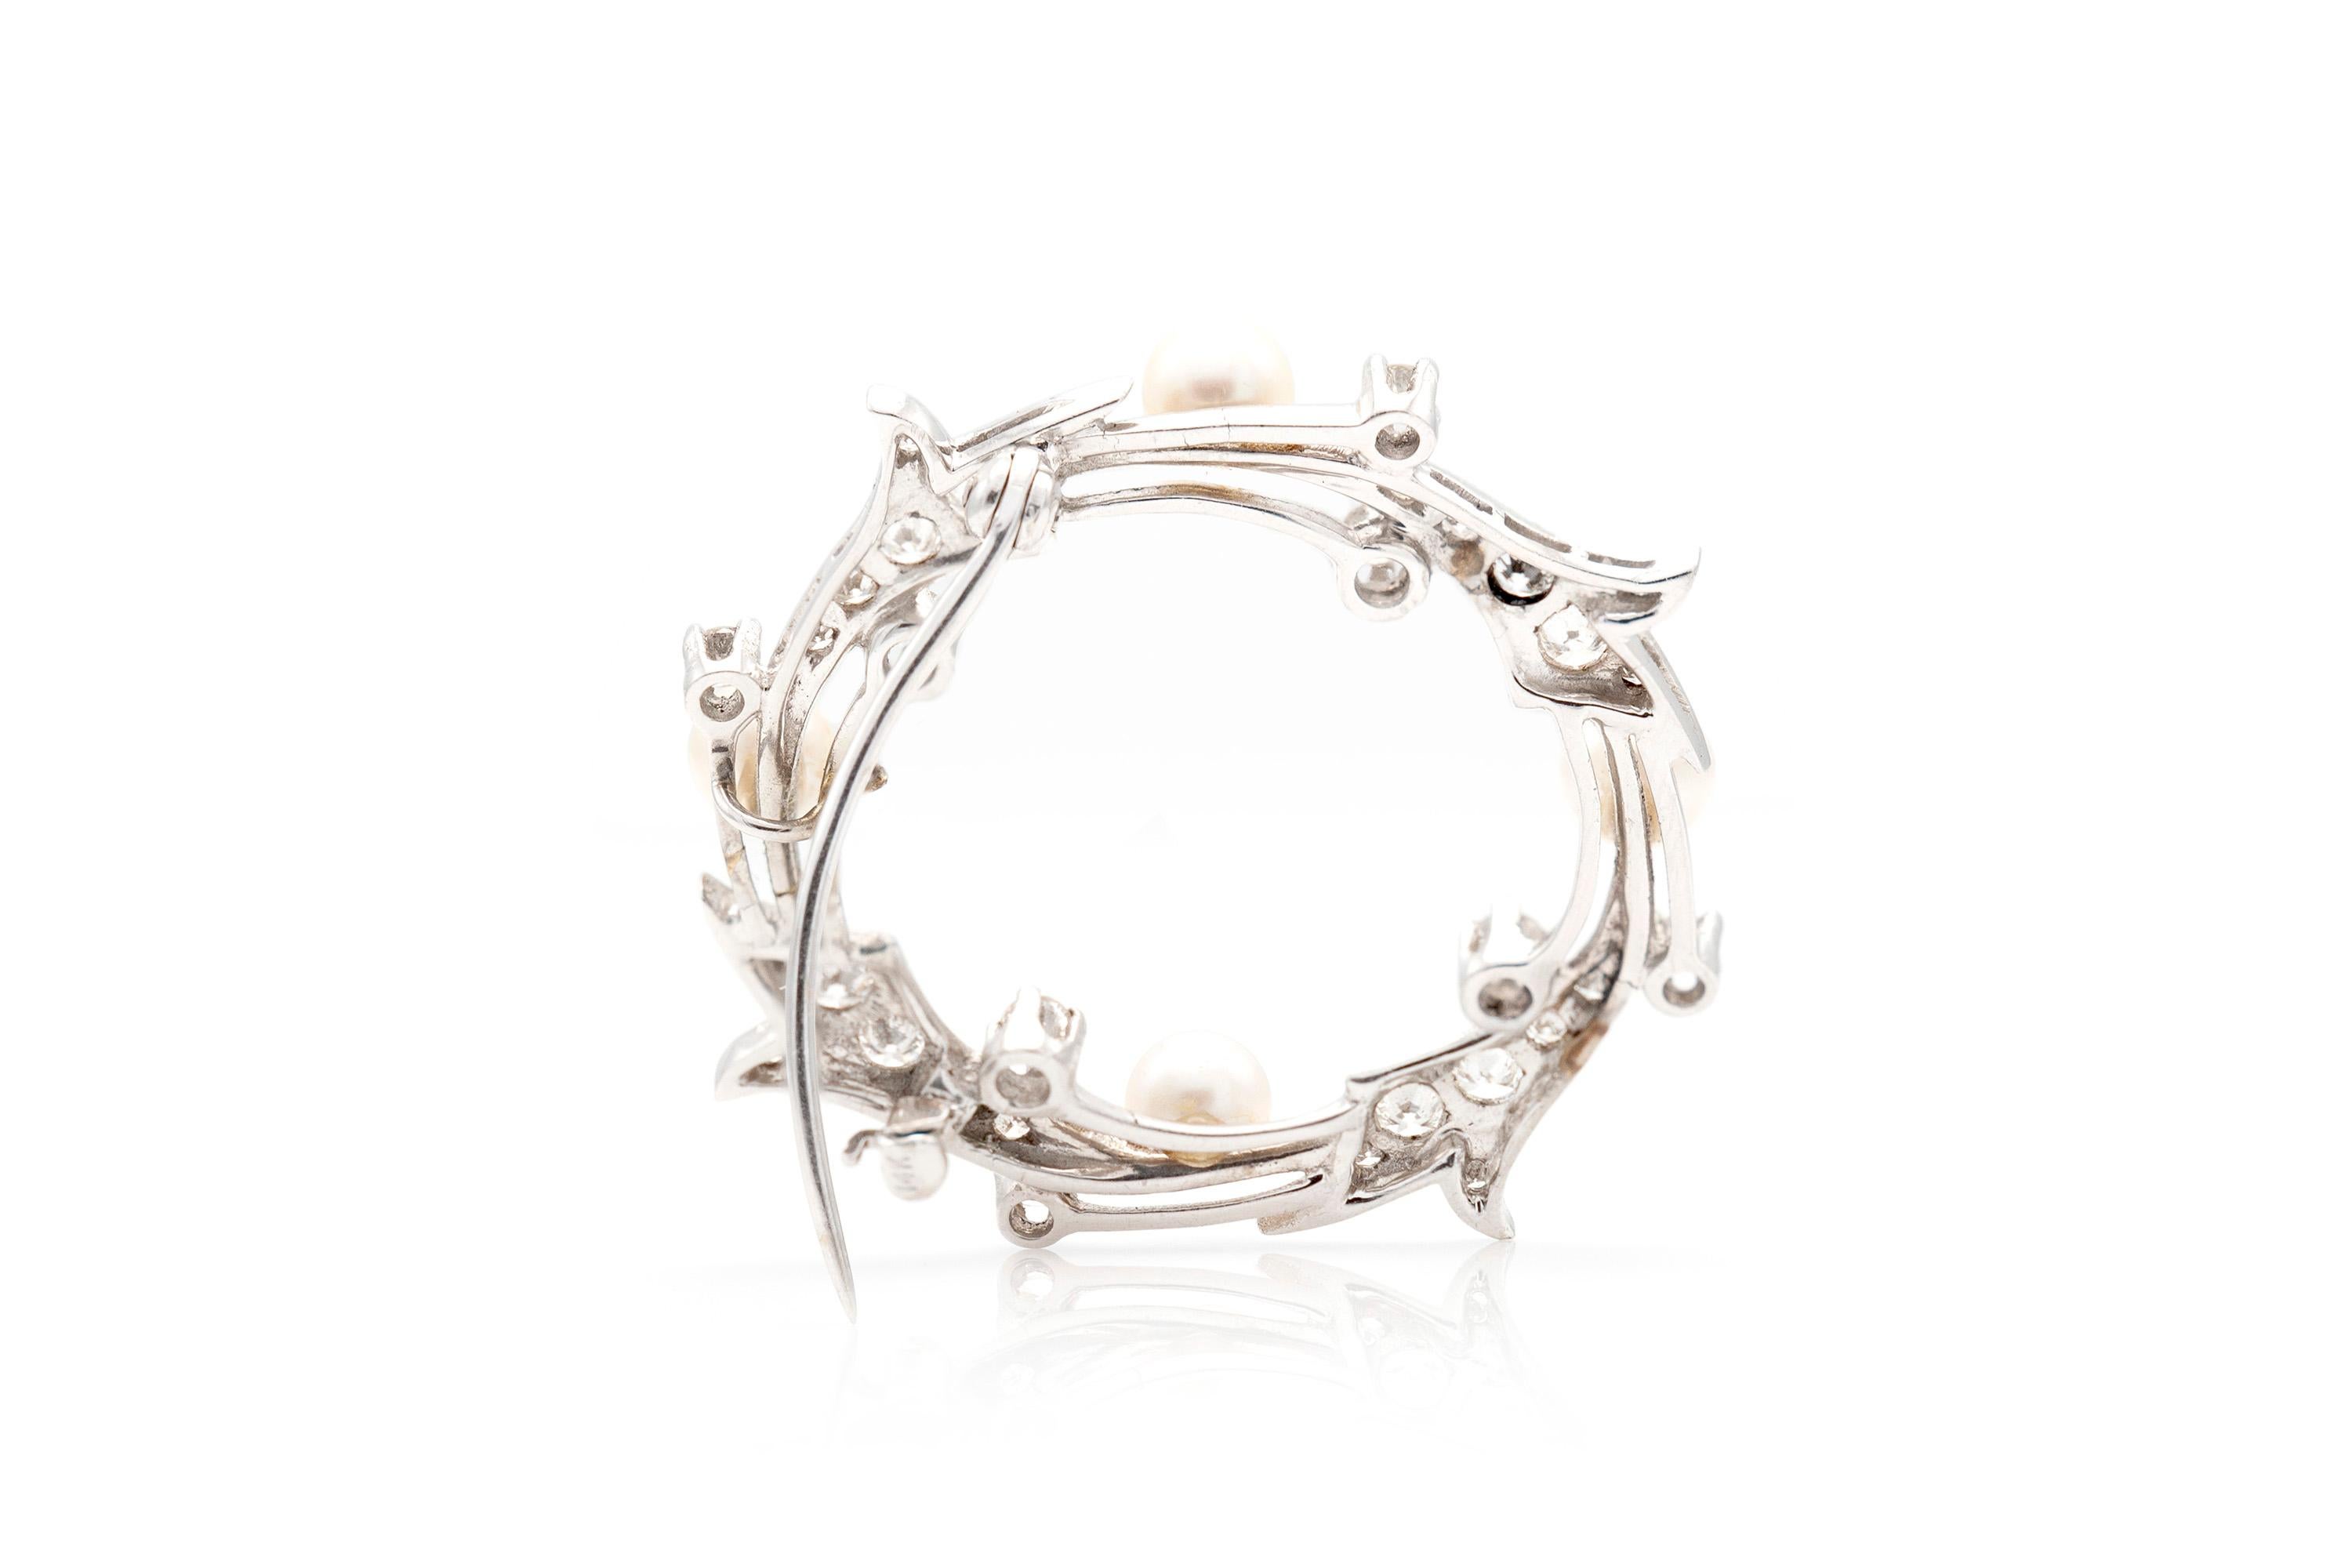 Finely crafted in platinum with pearls and approximately 2.00 carats of diamonds.